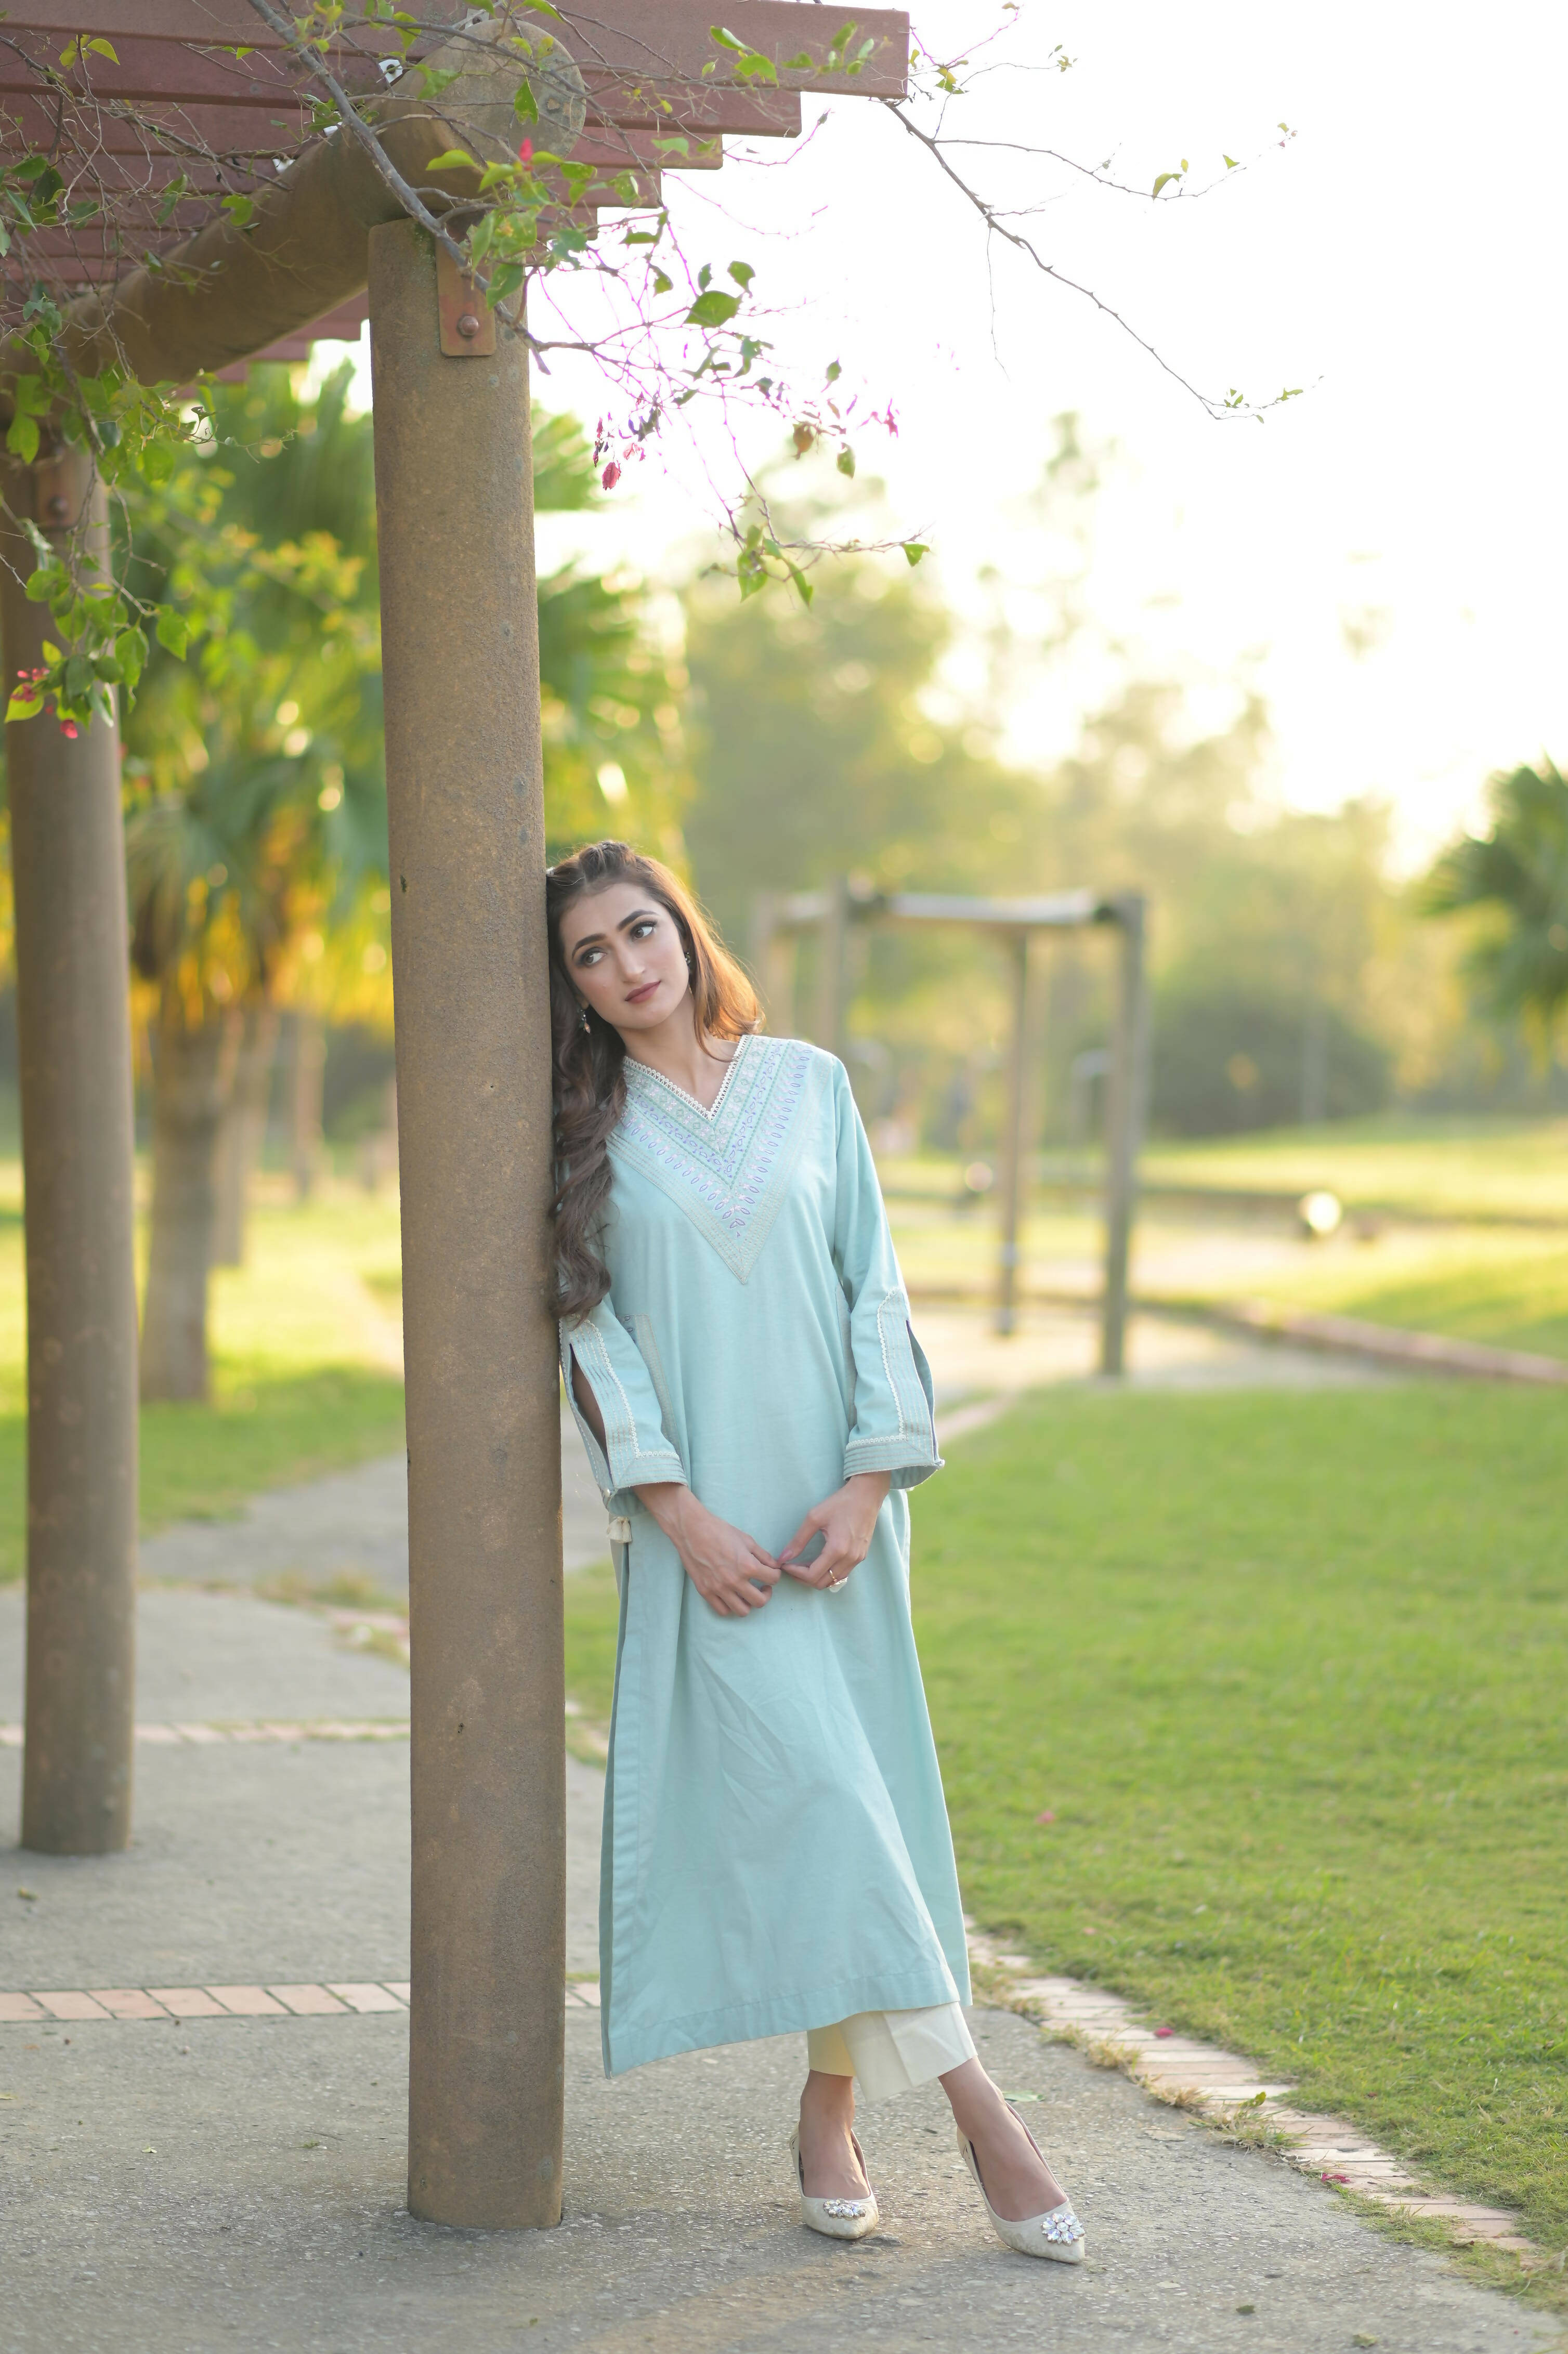 Knitted Blends | Women Branded Kurta | Small, Medium & Large | Brand New with Tags